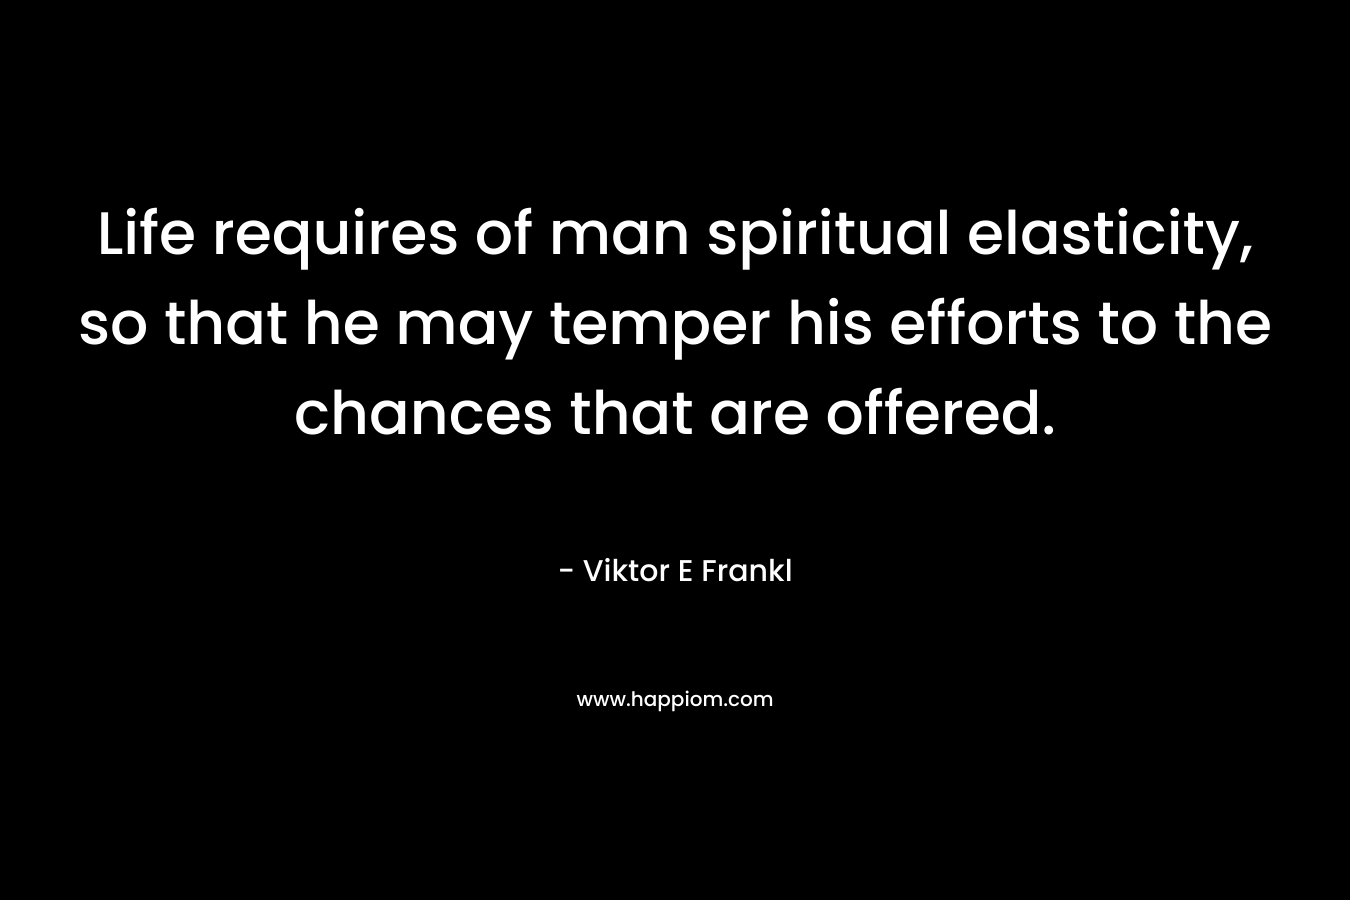 Life requires of man spiritual elasticity, so that he may temper his efforts to the chances that are offered.